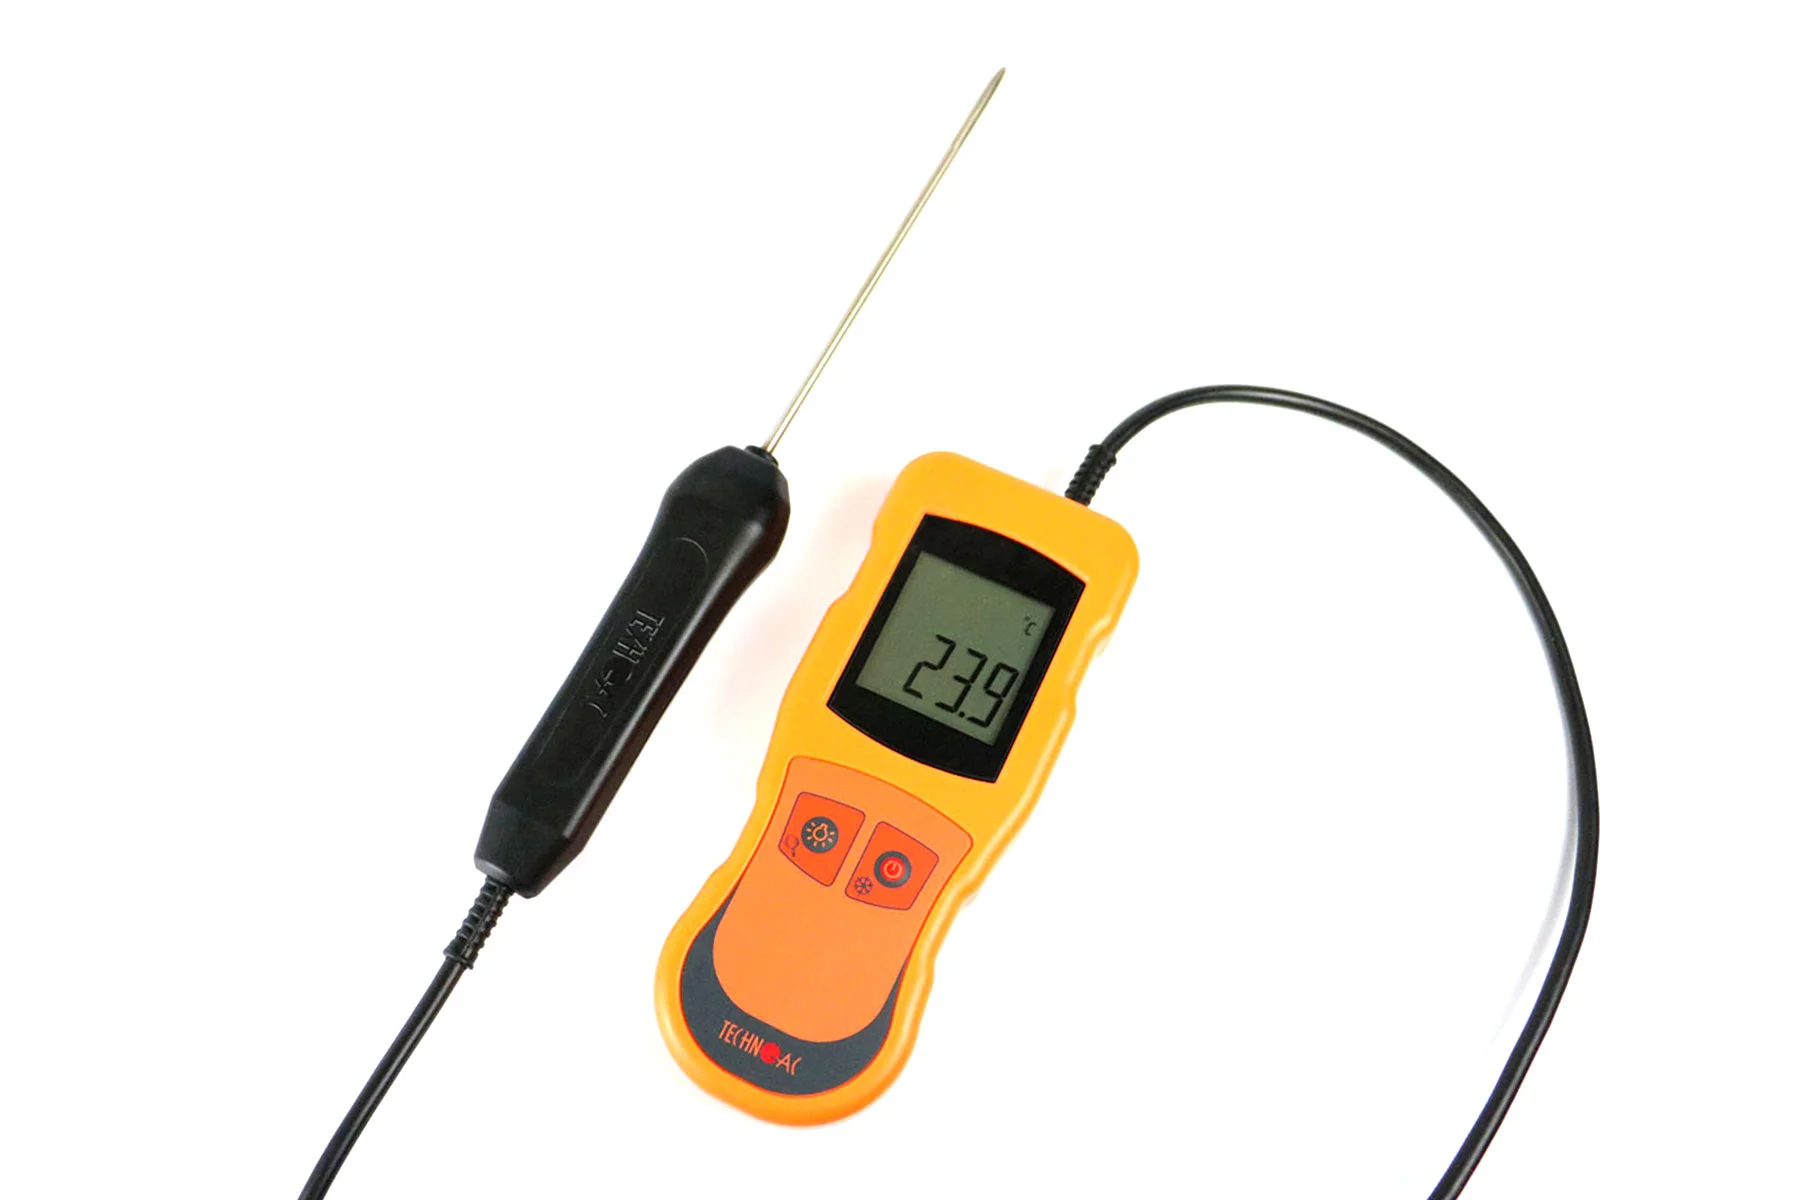 https://www.technoac.com/assets/images/products/digital-thermometers/dt-501p.webp